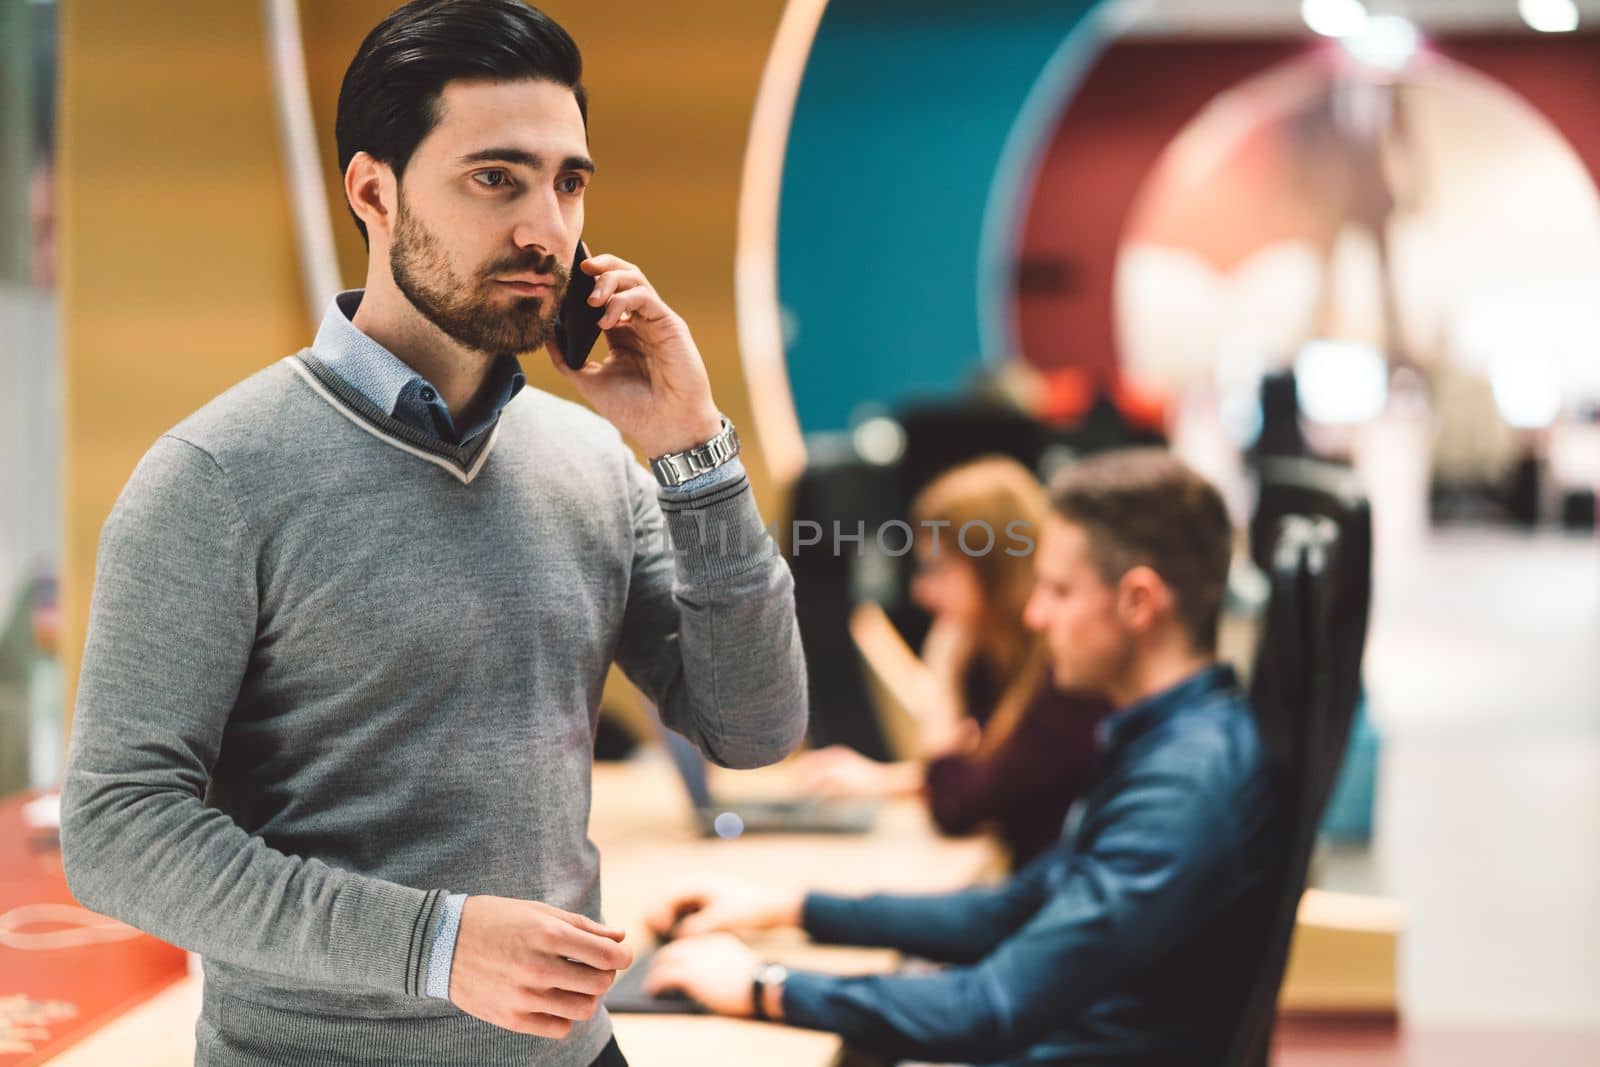 Businessman talking on the phone, while at the office, trying not to disturb his colleagues working next to him by VisualProductions